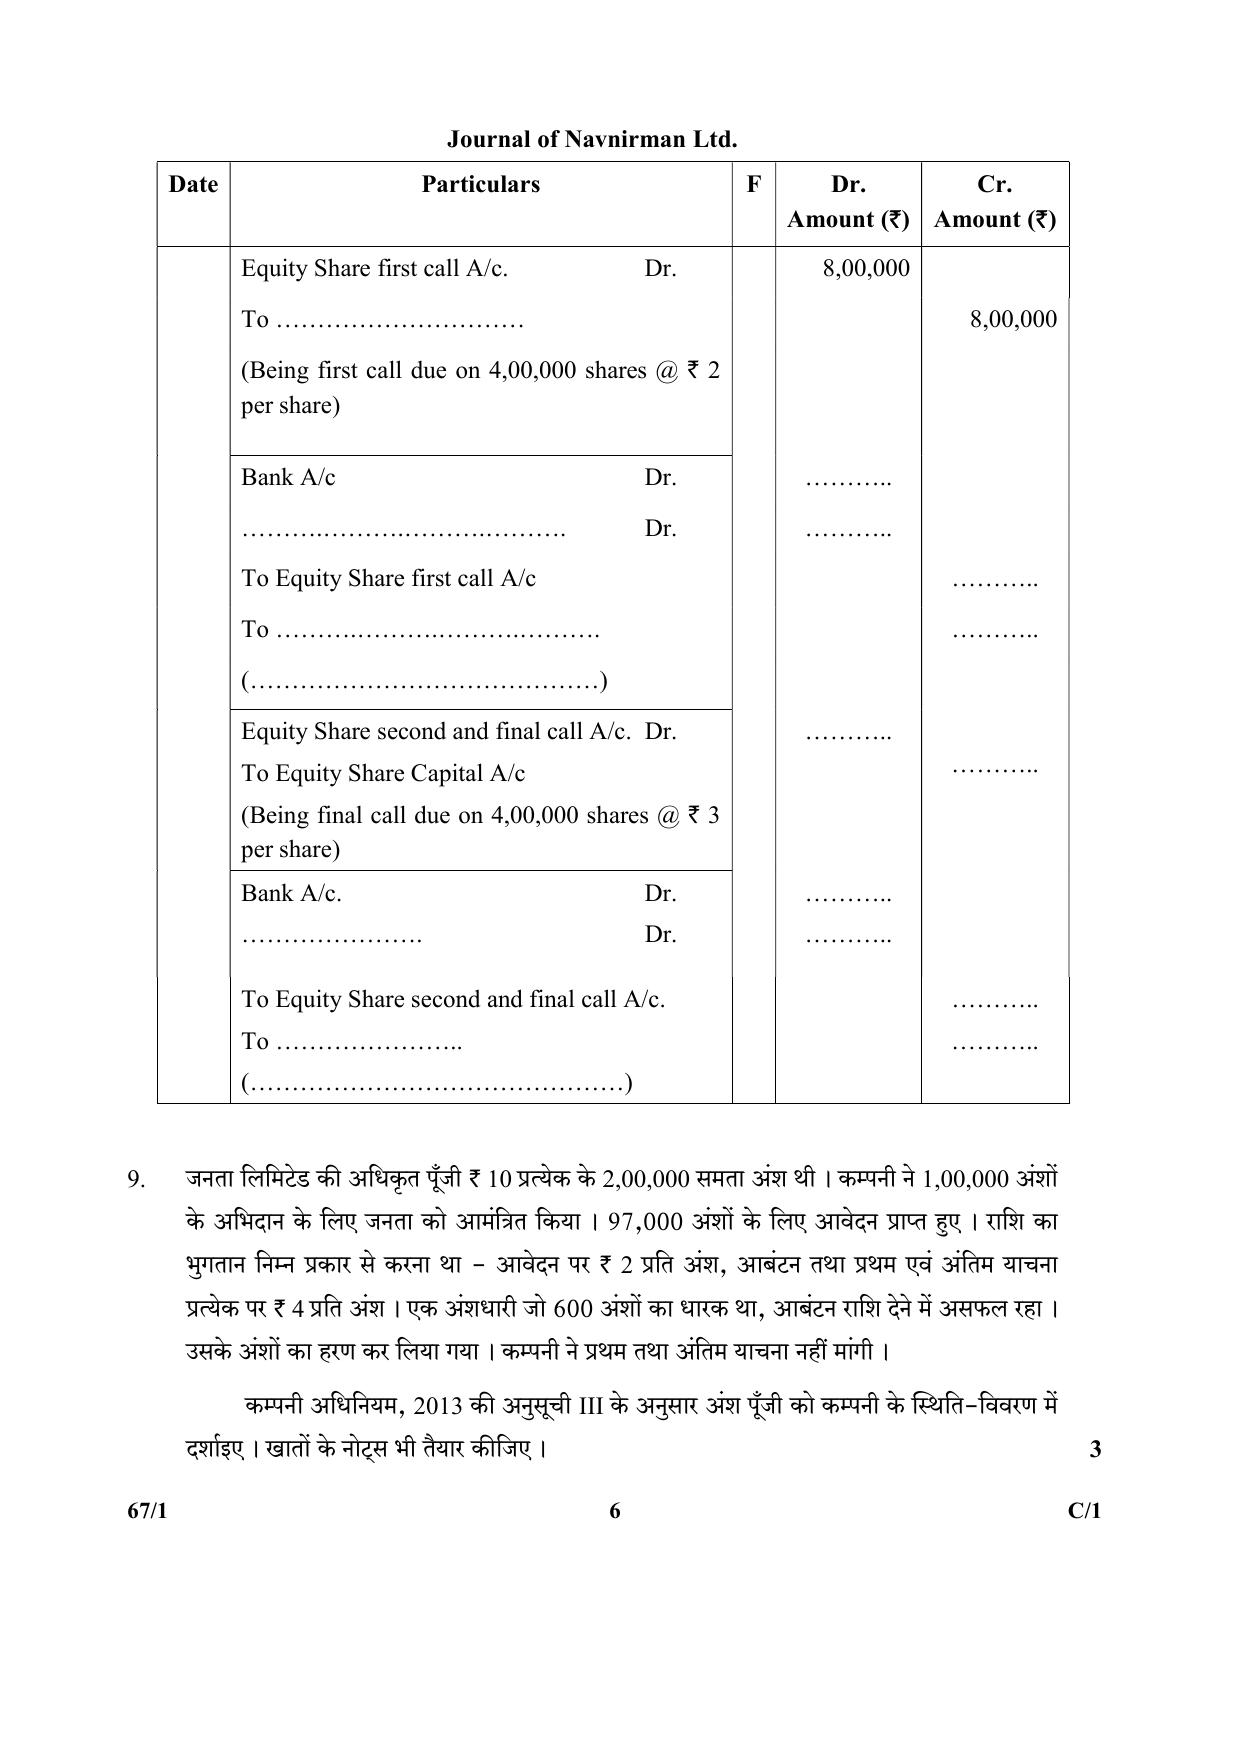 CBSE Class 12 67-1  (Accountancy) 2018 Compartment Question Paper - Page 6